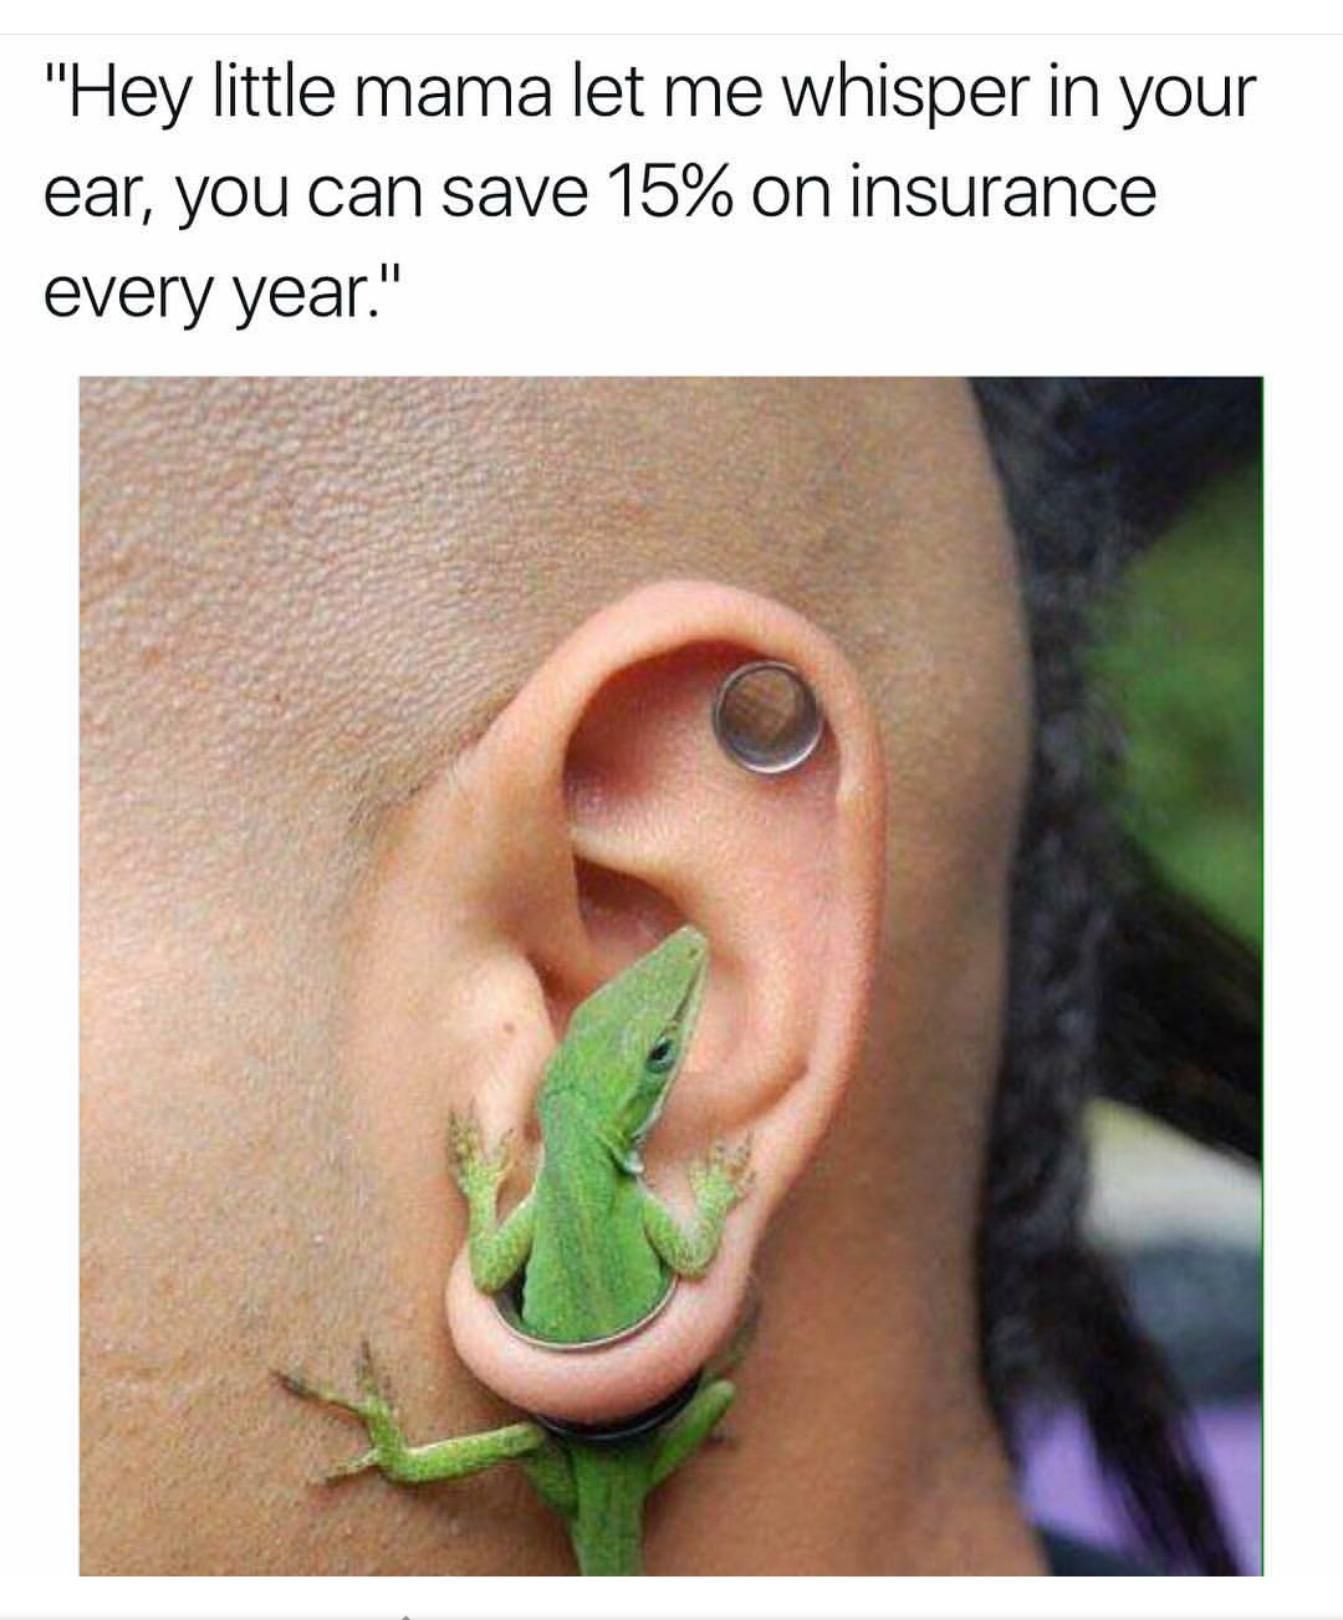 So you saying two earrings could save me 30%...